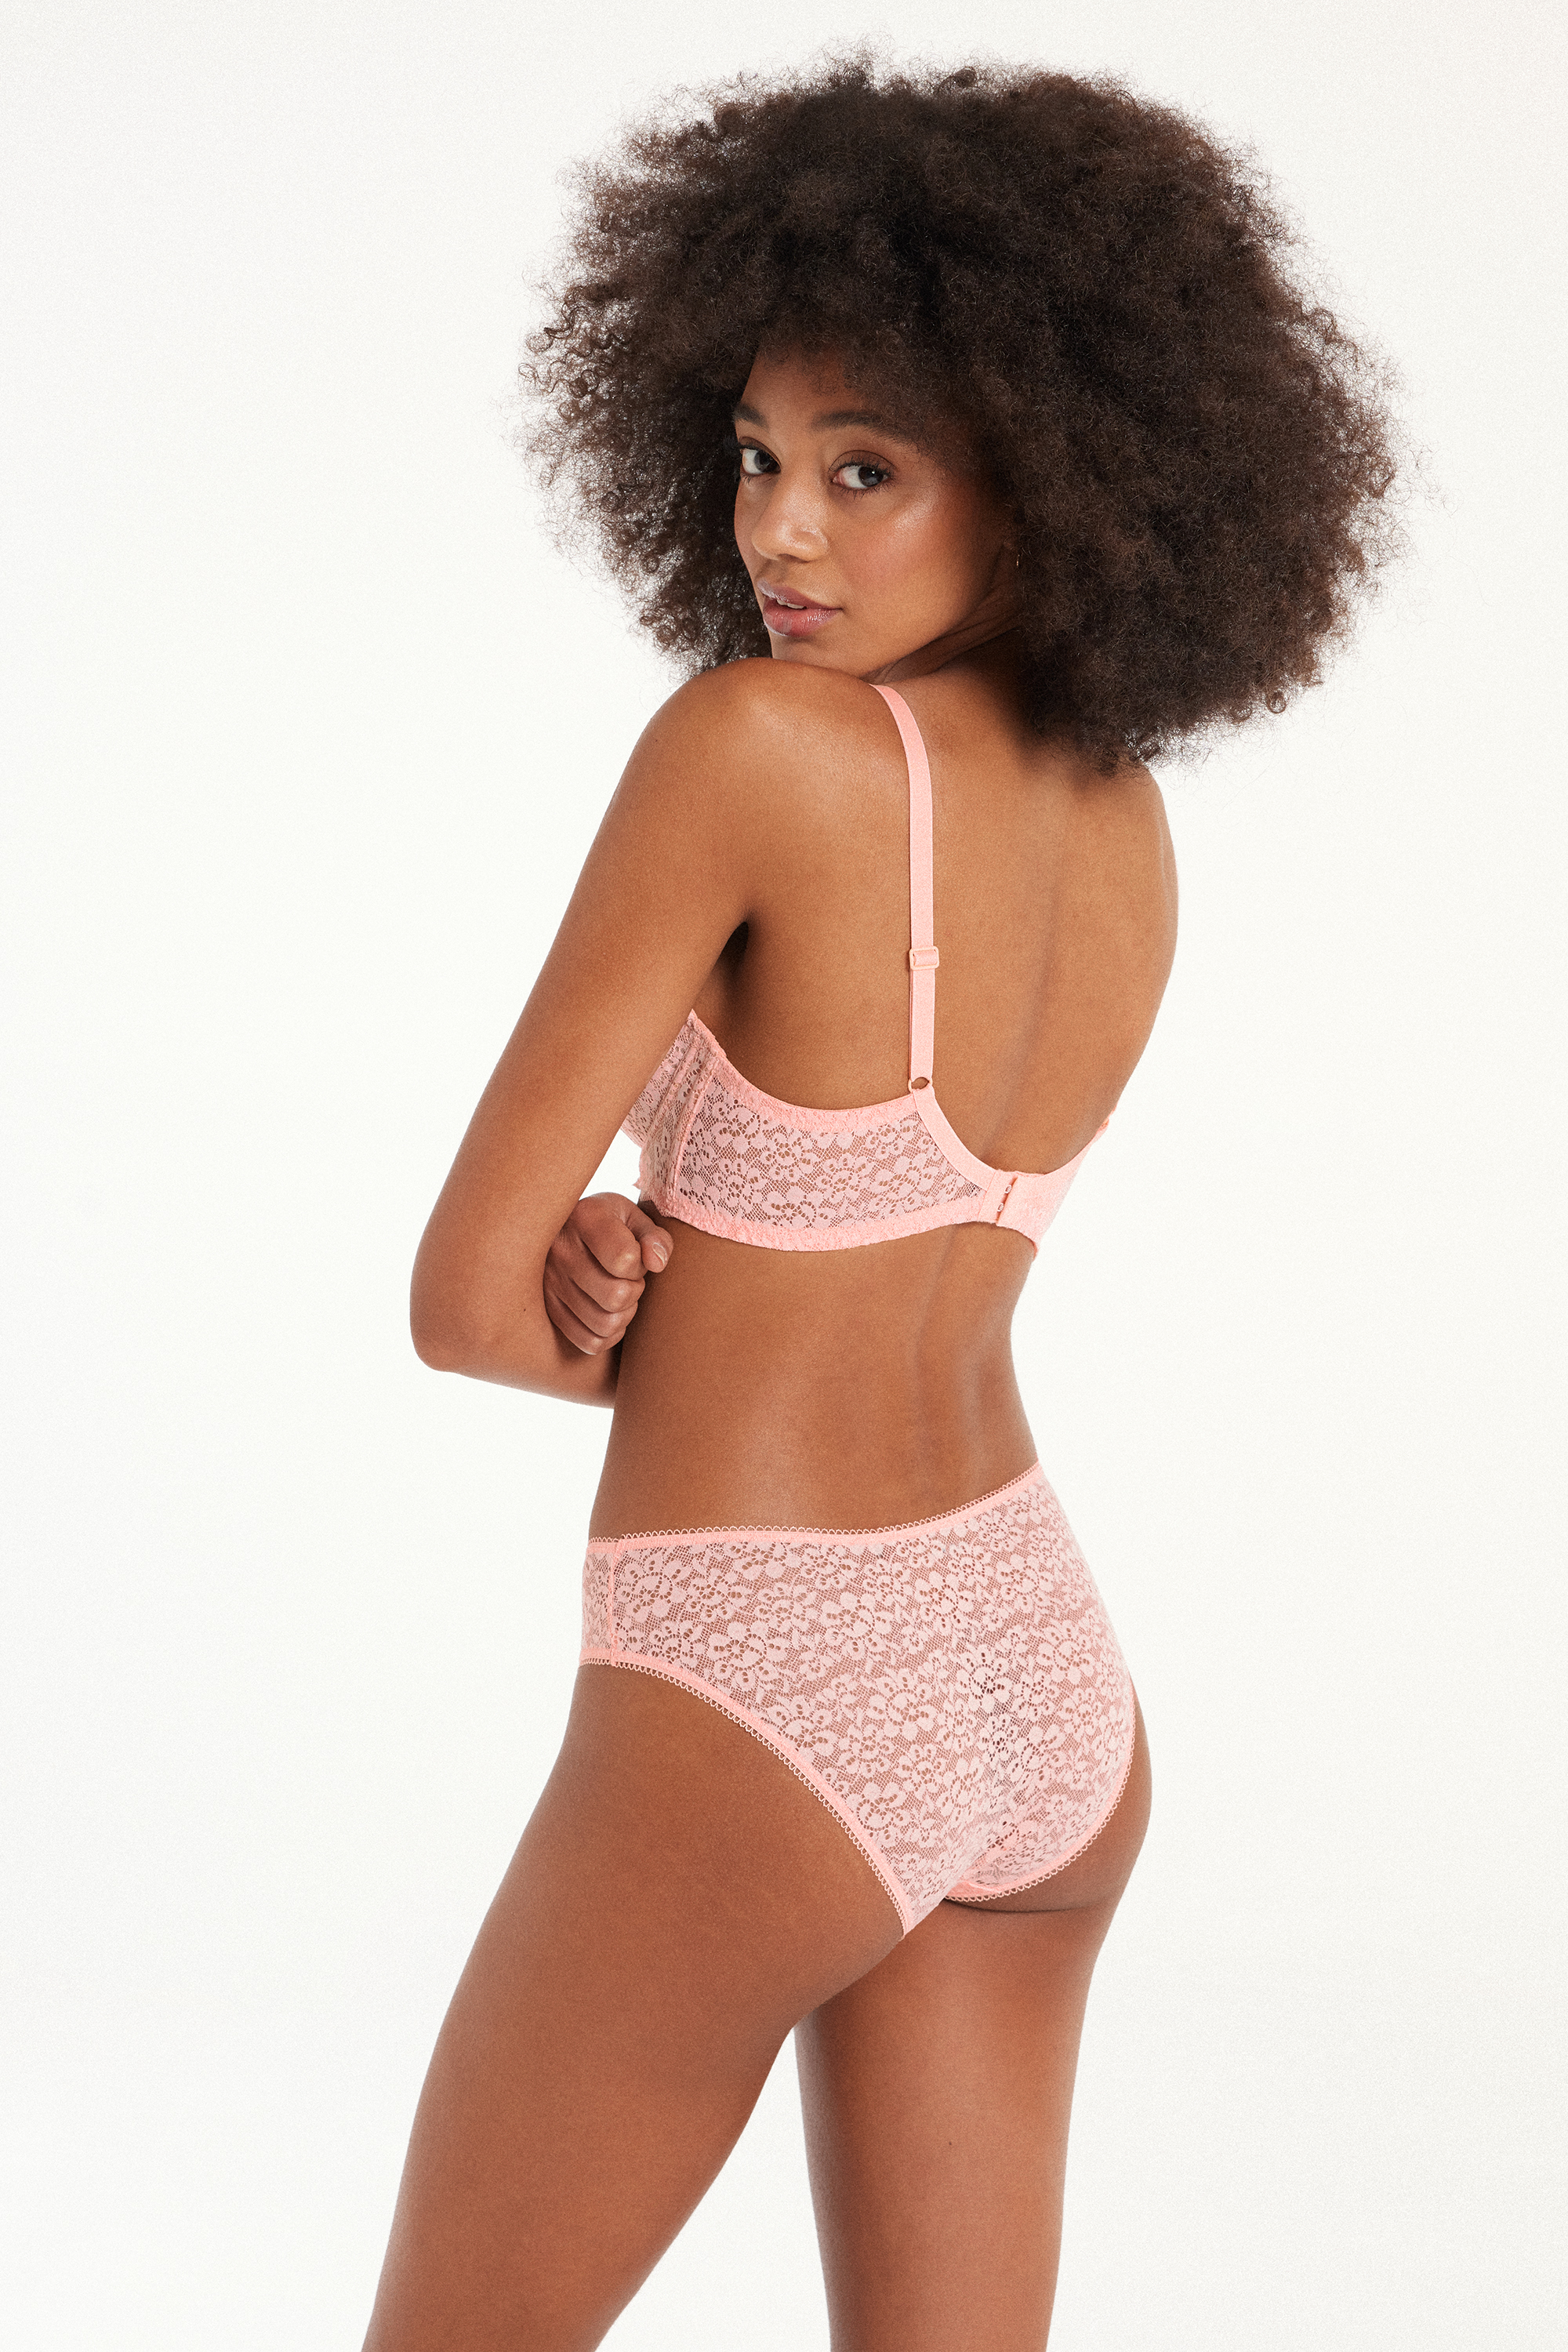 Recycled Lace High-Cut Panties